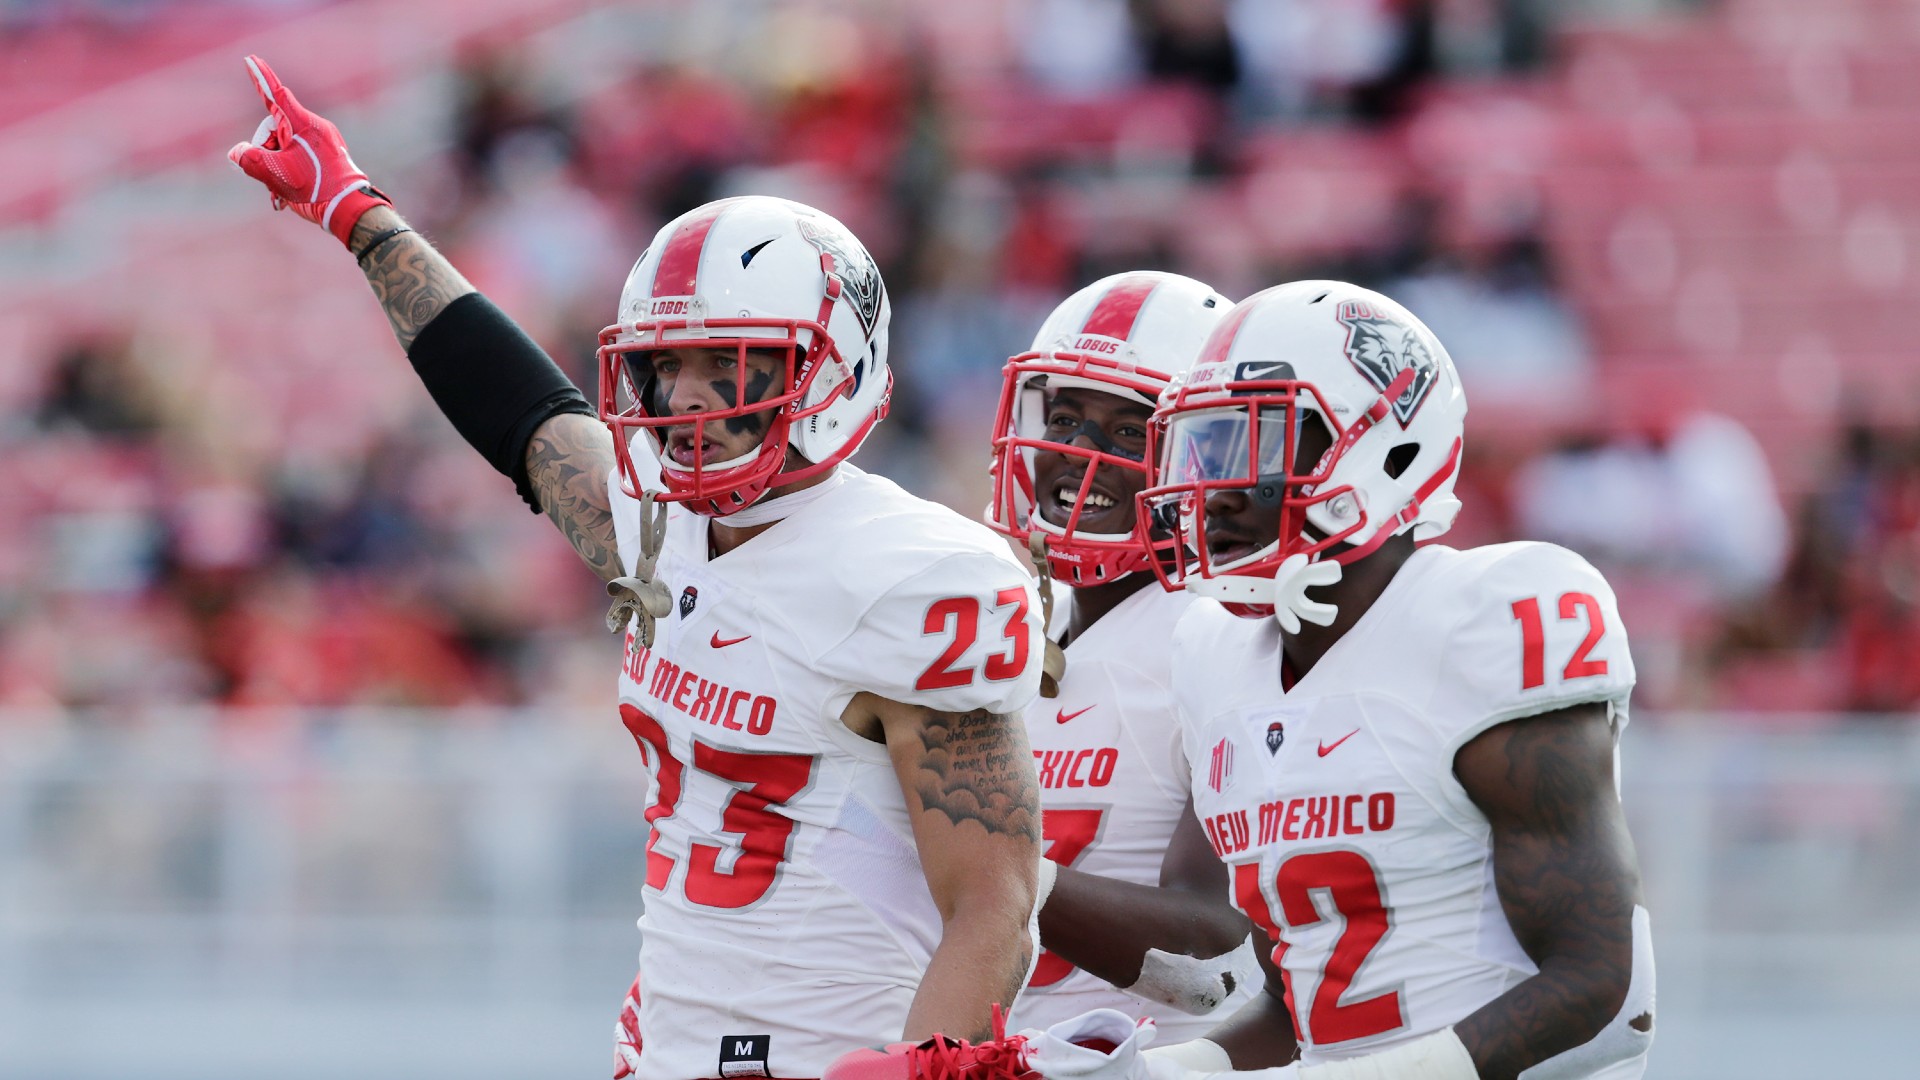 College Football Odds, Picks, Preview for New Mexico vs. San Diego State: Betting Value on Underdog (Oct. 9) article feature image